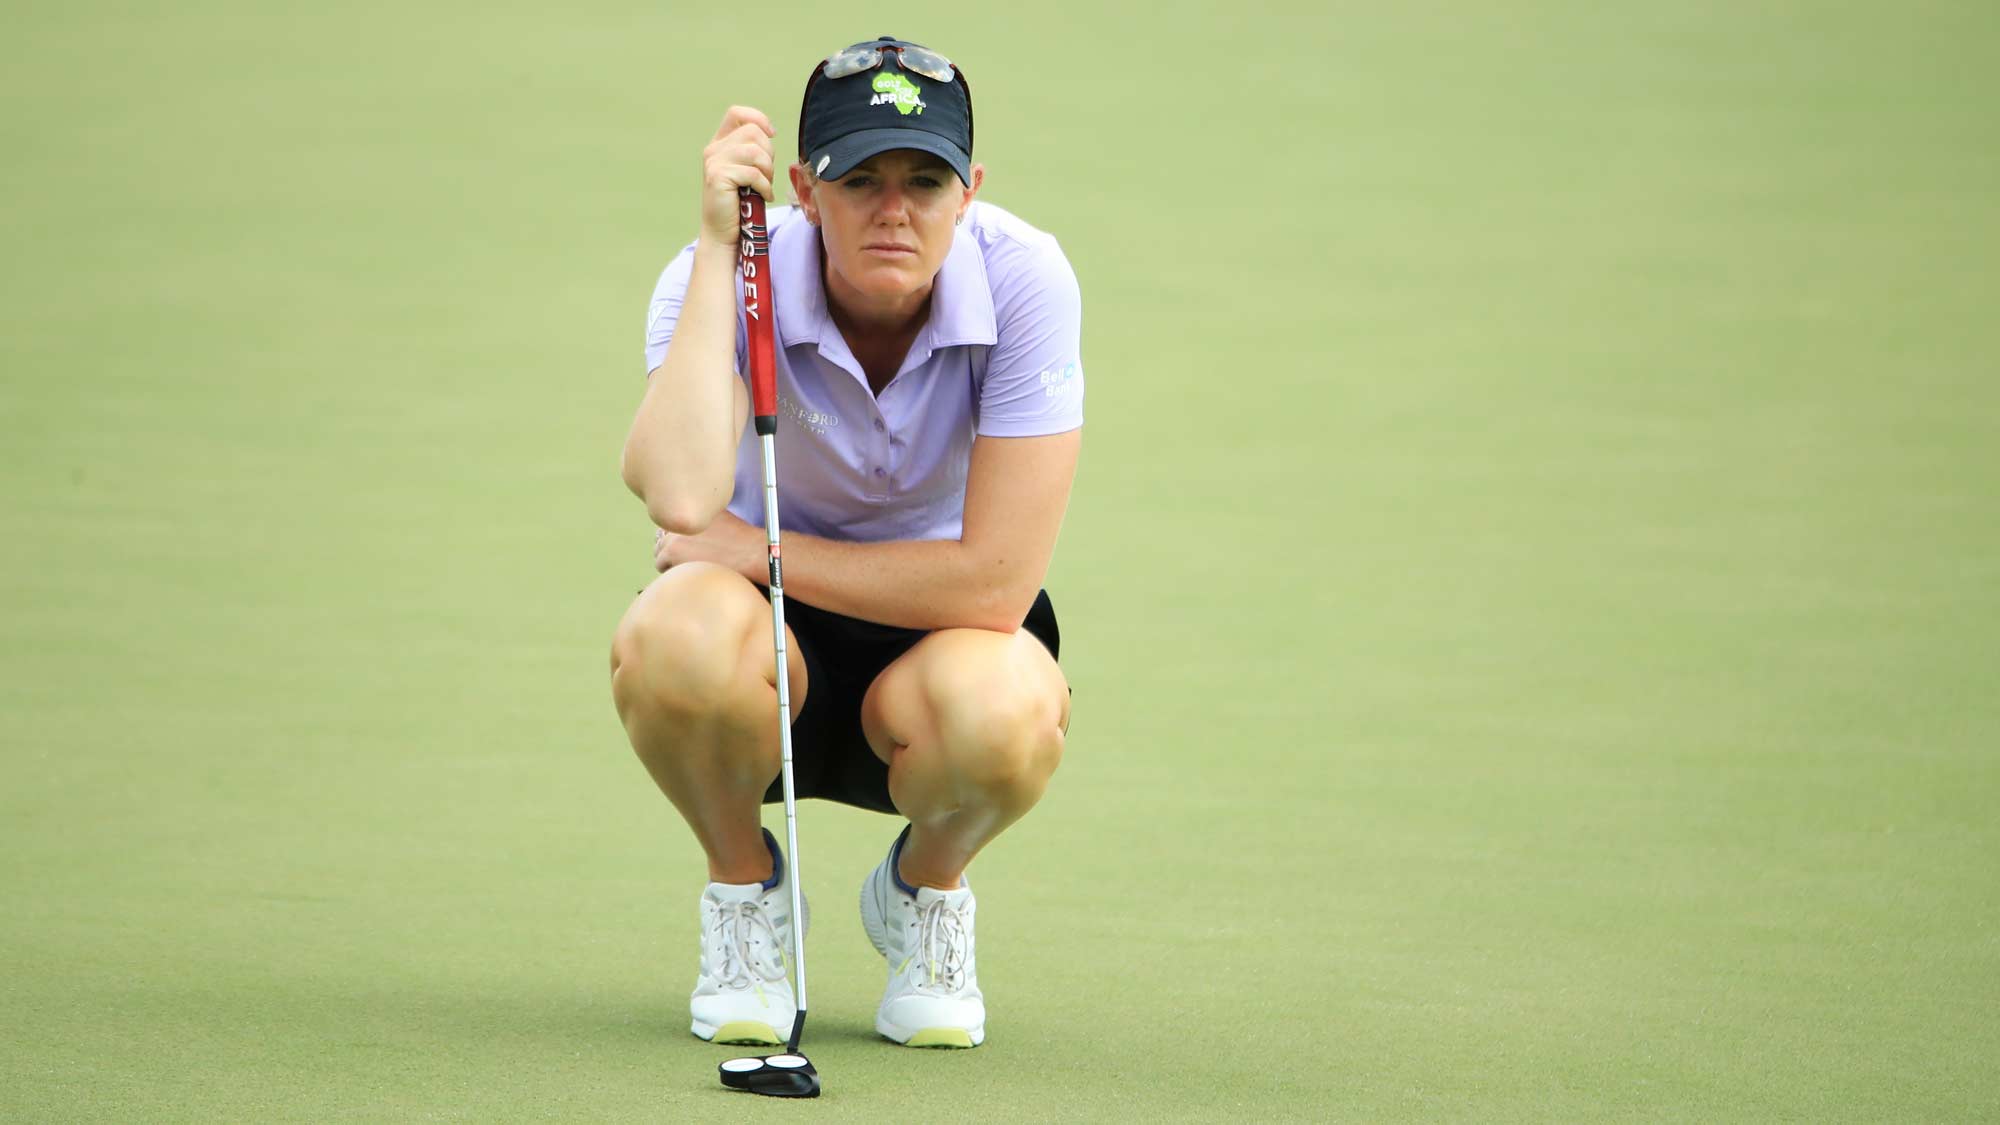  Amy Olson of the United States lines up a putt on the 18th green during the second round of the HSBC Women's World Championship at Sentosa Golf Club on March 01, 2019 in Singapore.